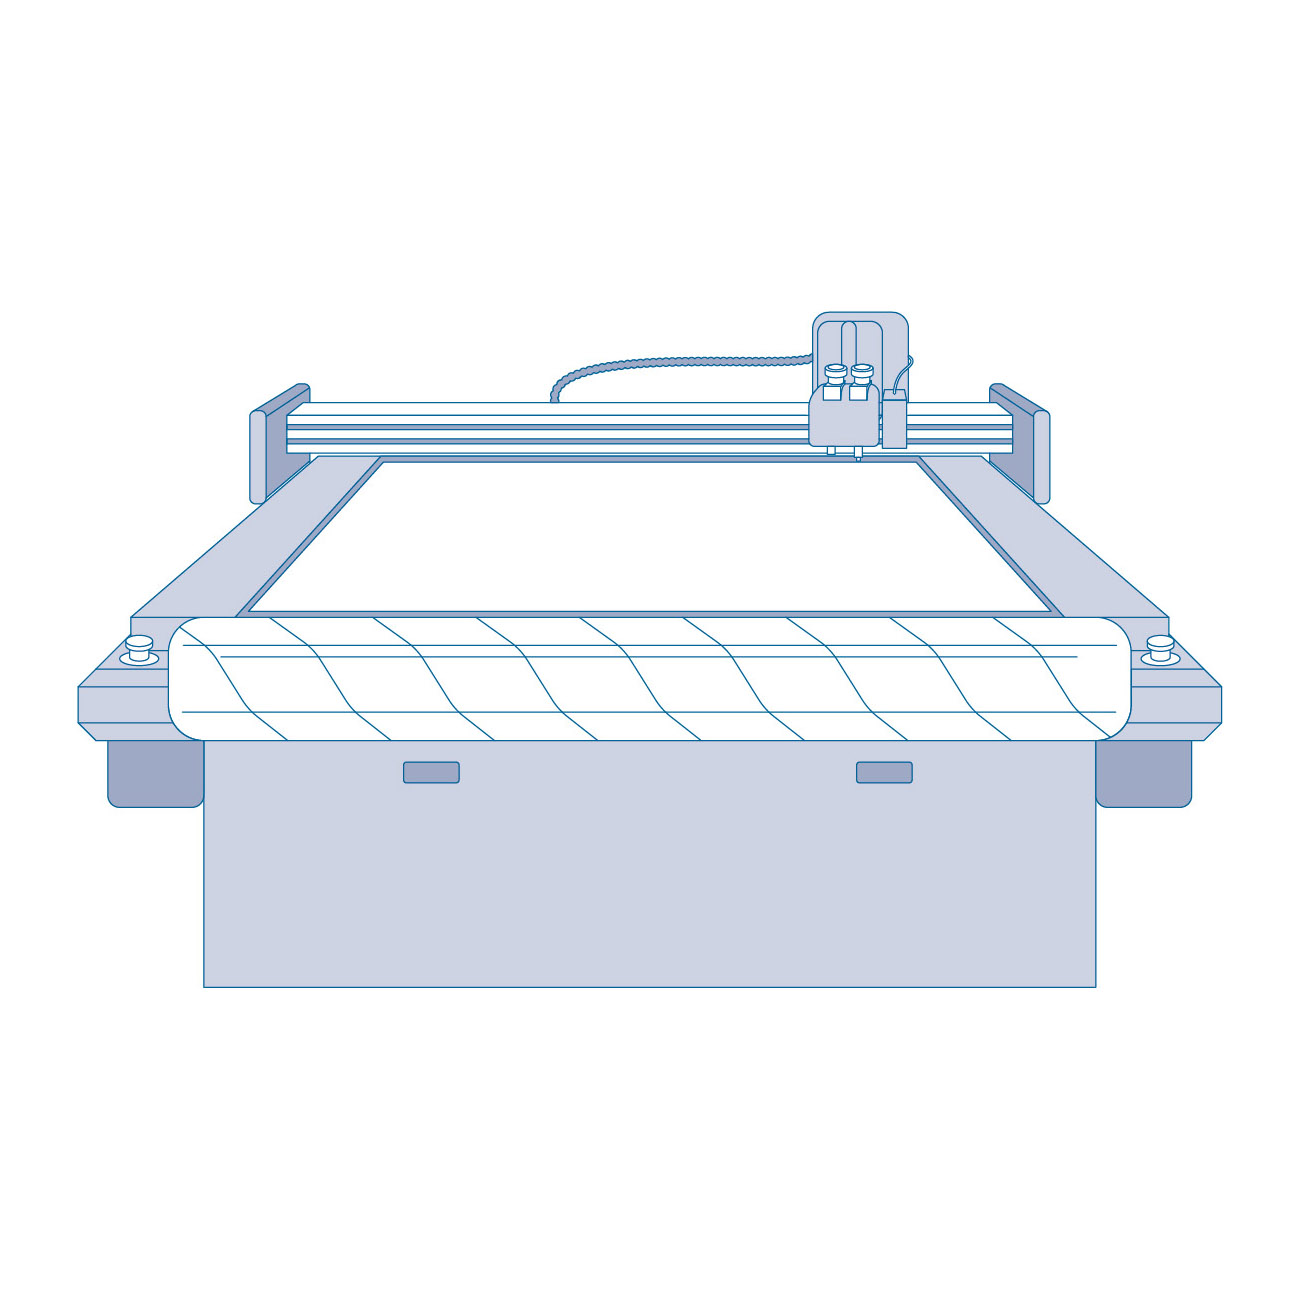 CAD Process for Printed Packaging - Step 5